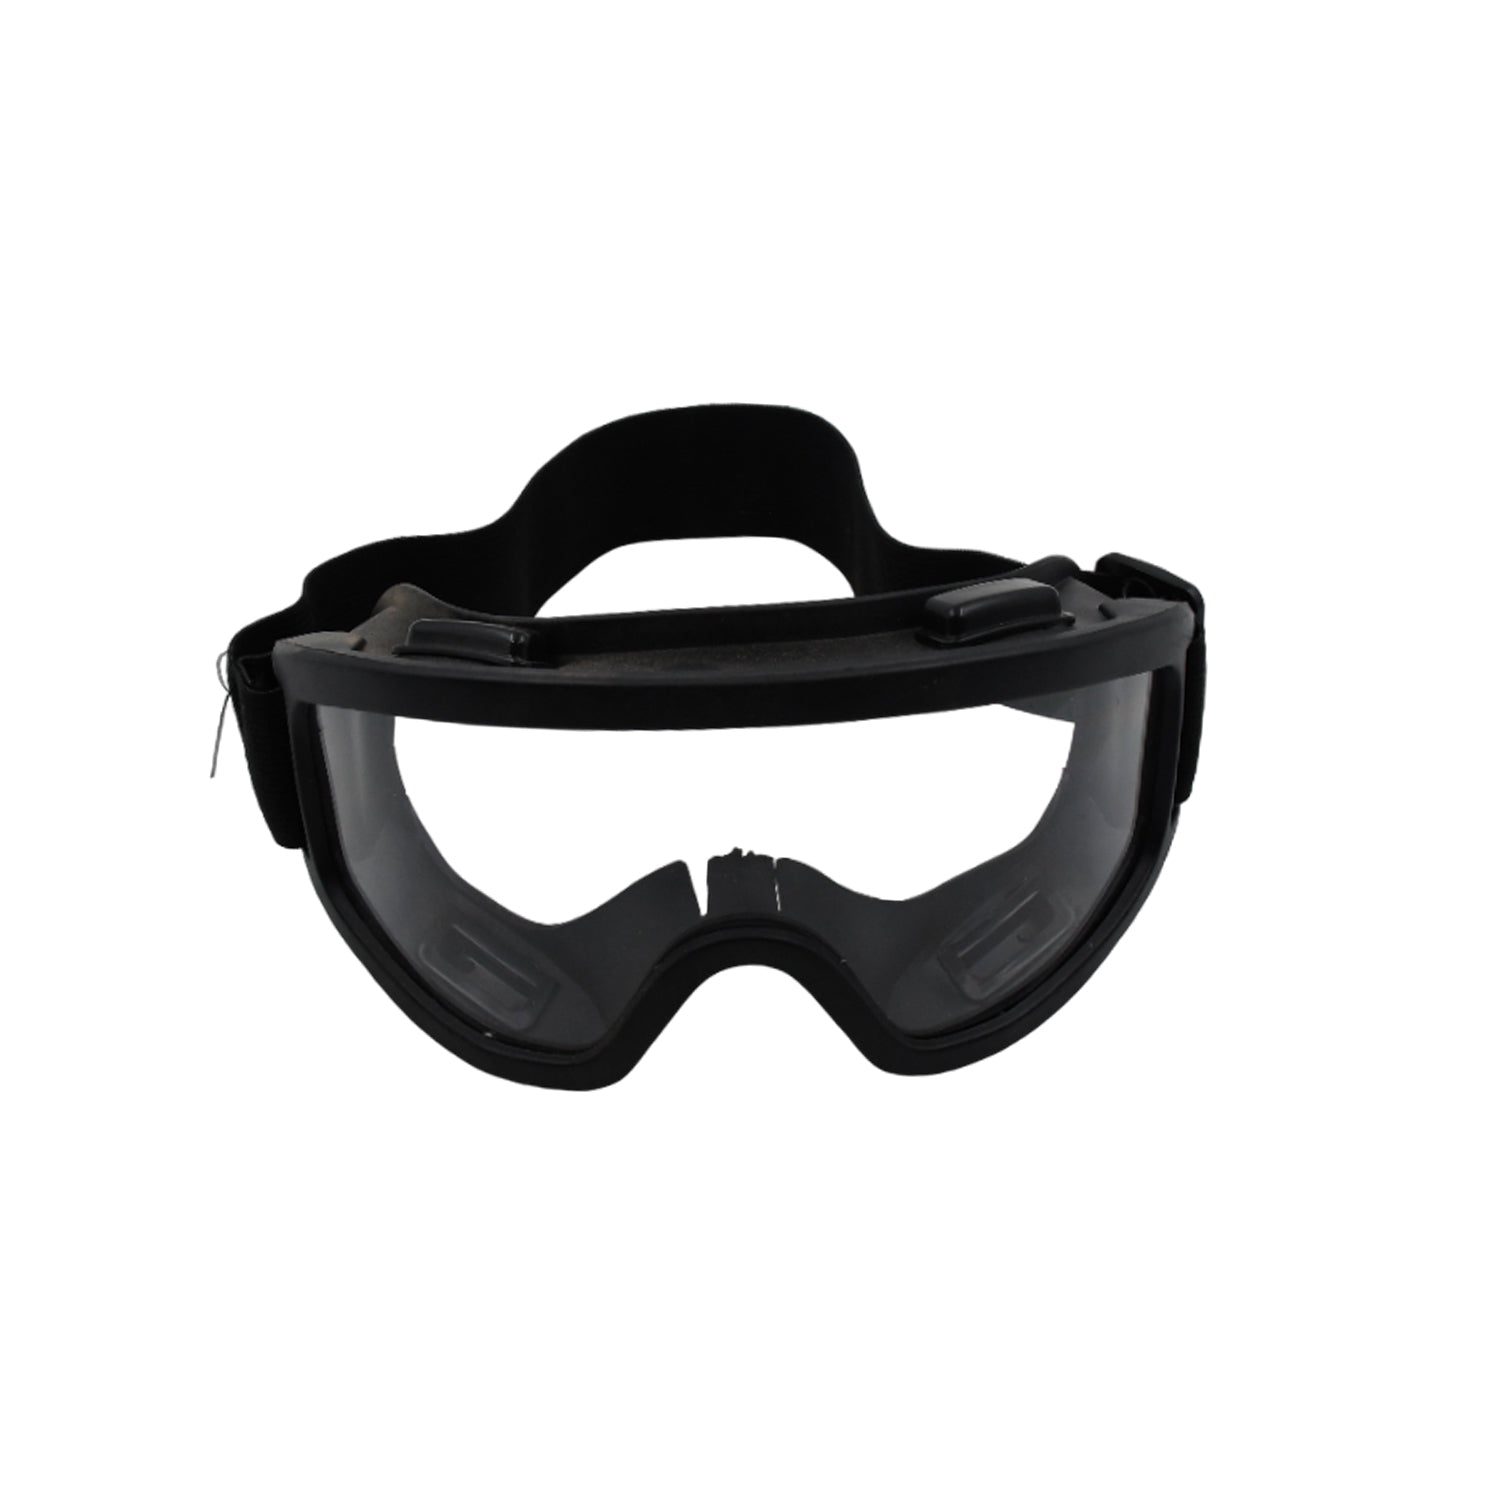 7553 Cycling Motorbike ATV/Dirt Bike Racing Transparent Goggles with Adjustable Strap Sunglasses, Protective Glasses Goggle, Outdoor Goggles Dustproof Windproof Riding Goggles Safety Goggles